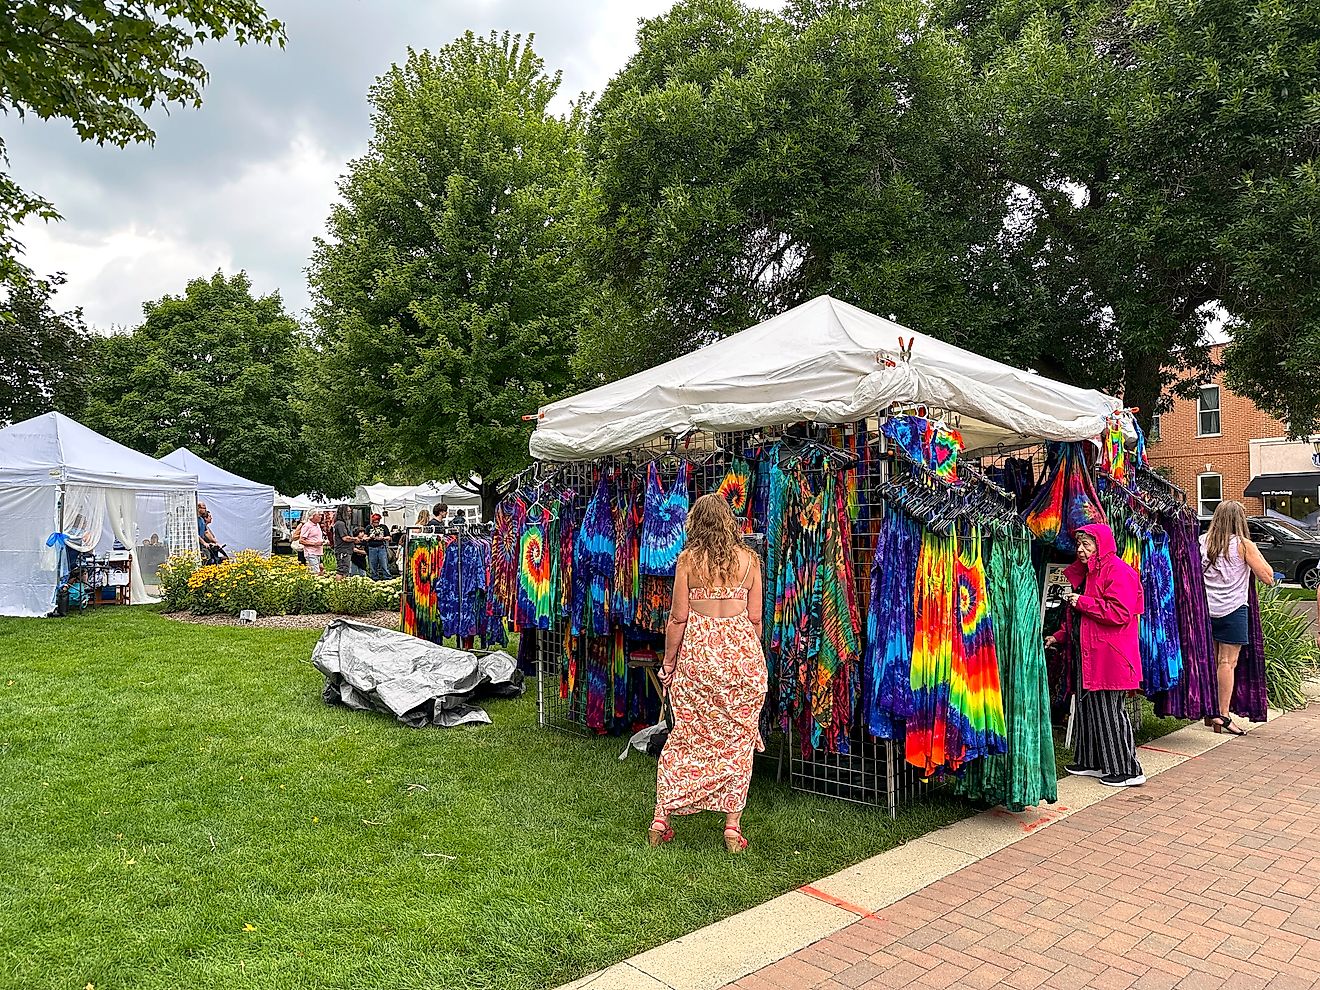 The 42nd Annual Festival of the Arts is a 2-day art and music festival in Cook Park located in historic downtown Libertyville, Illinois, via patty_c / iStock.com